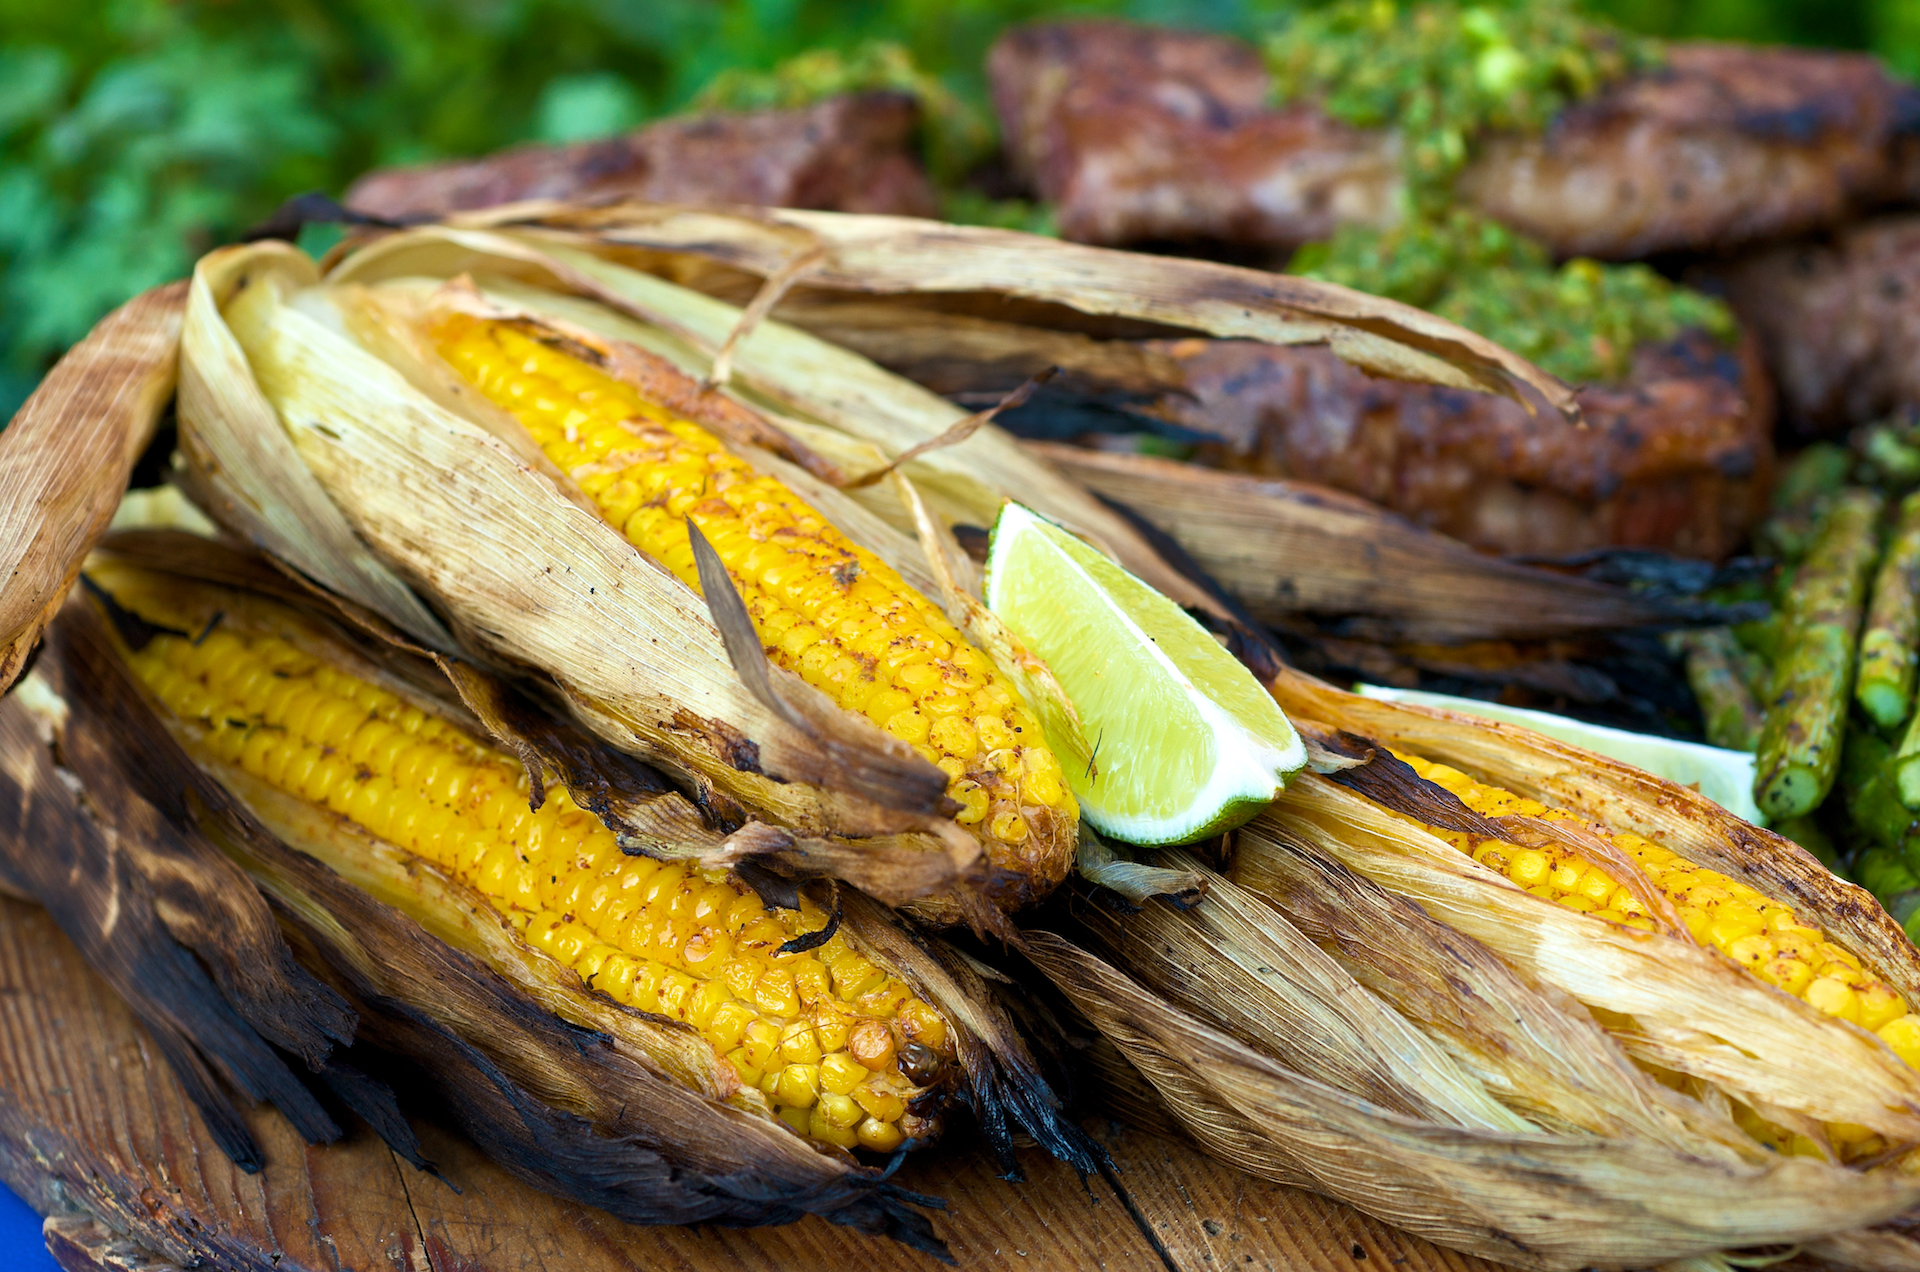 Grilled Corn with Chipotle-Lime Butter